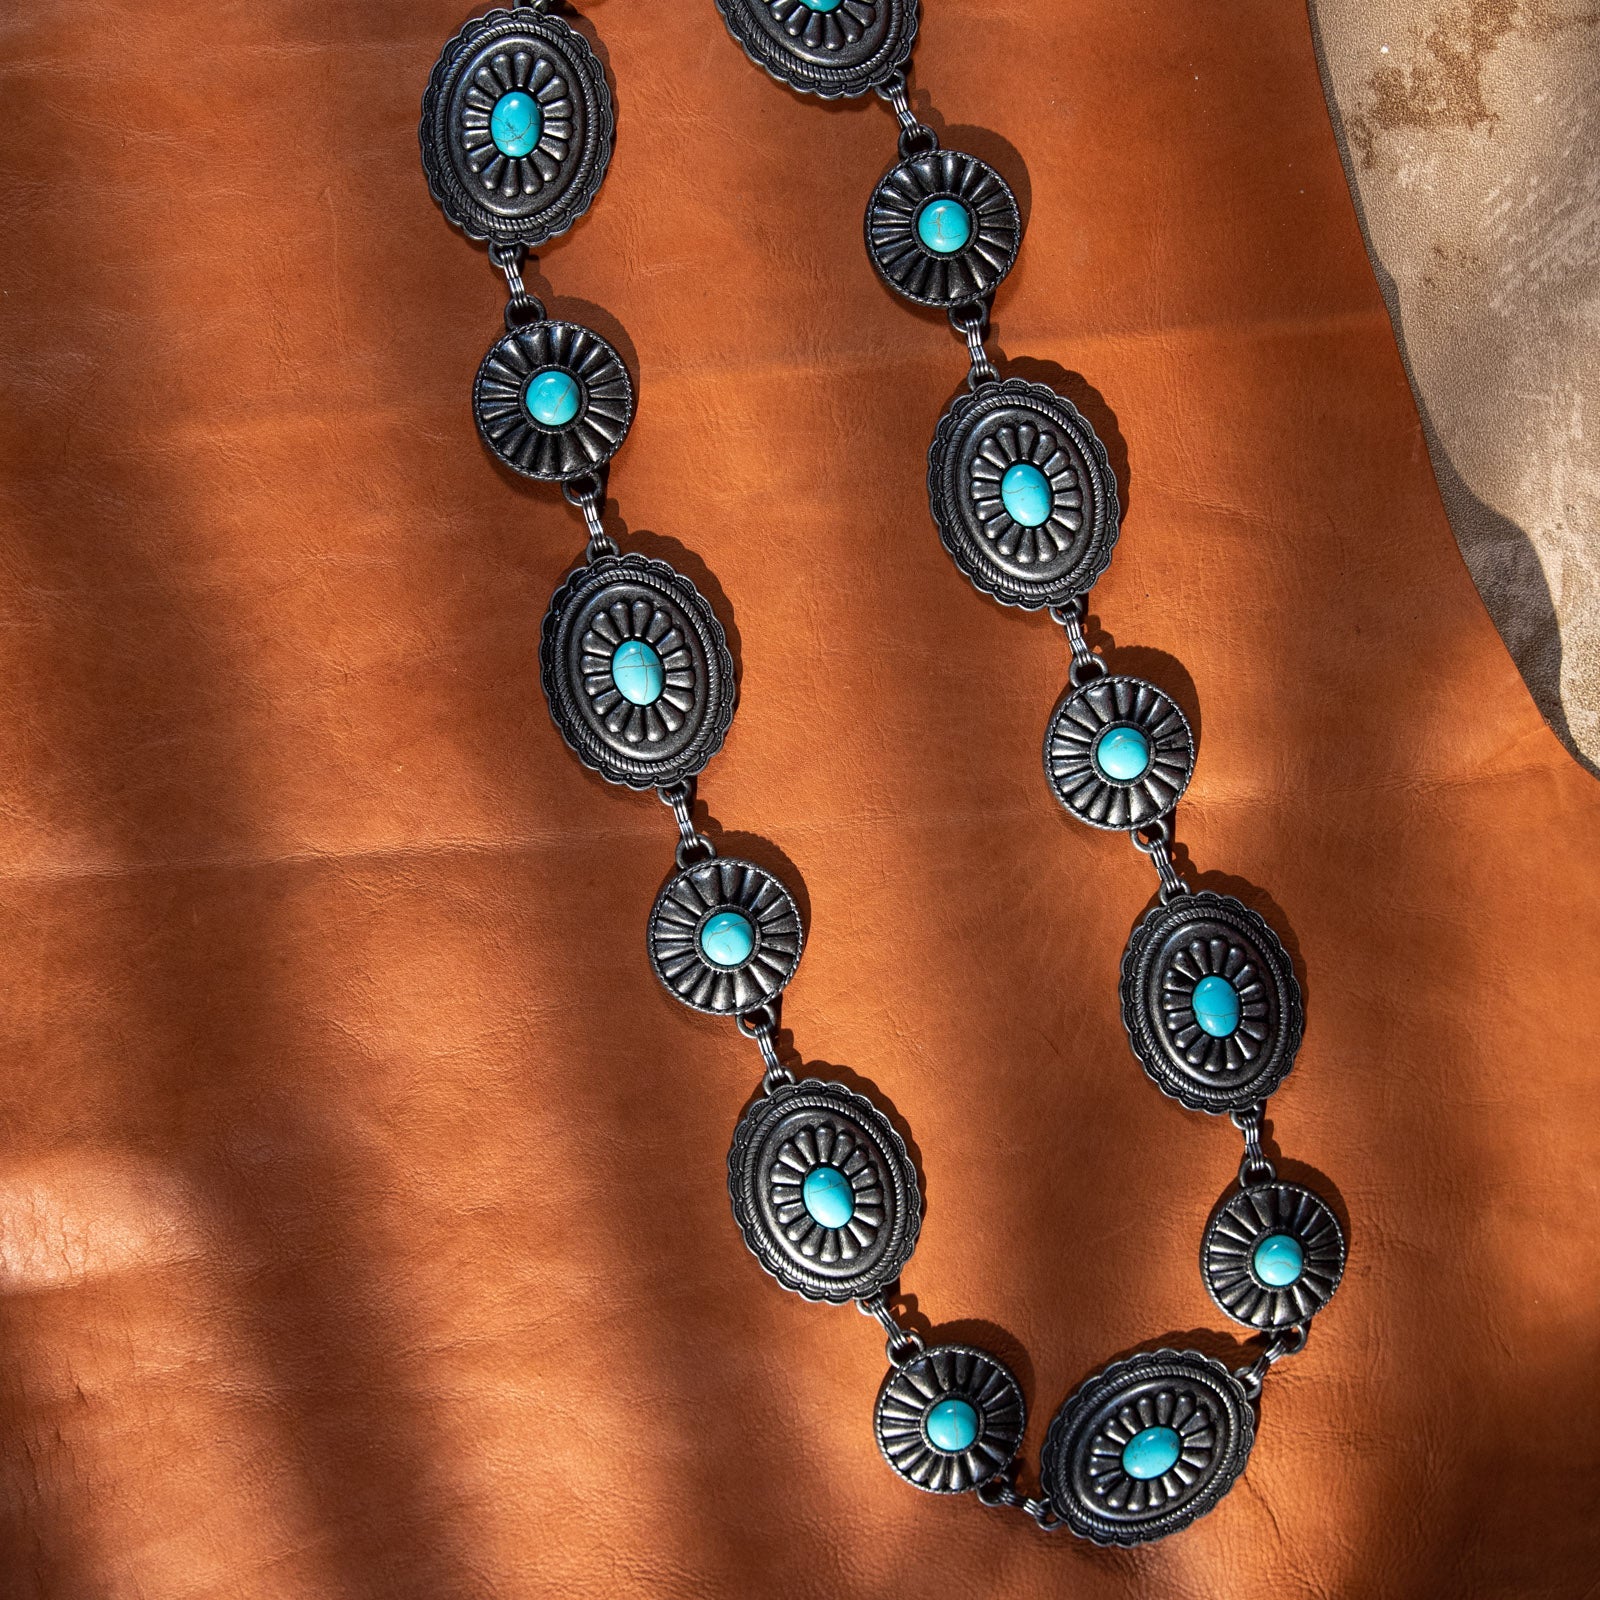 Rustic Couture Western Stone Concho Link Chain Belt